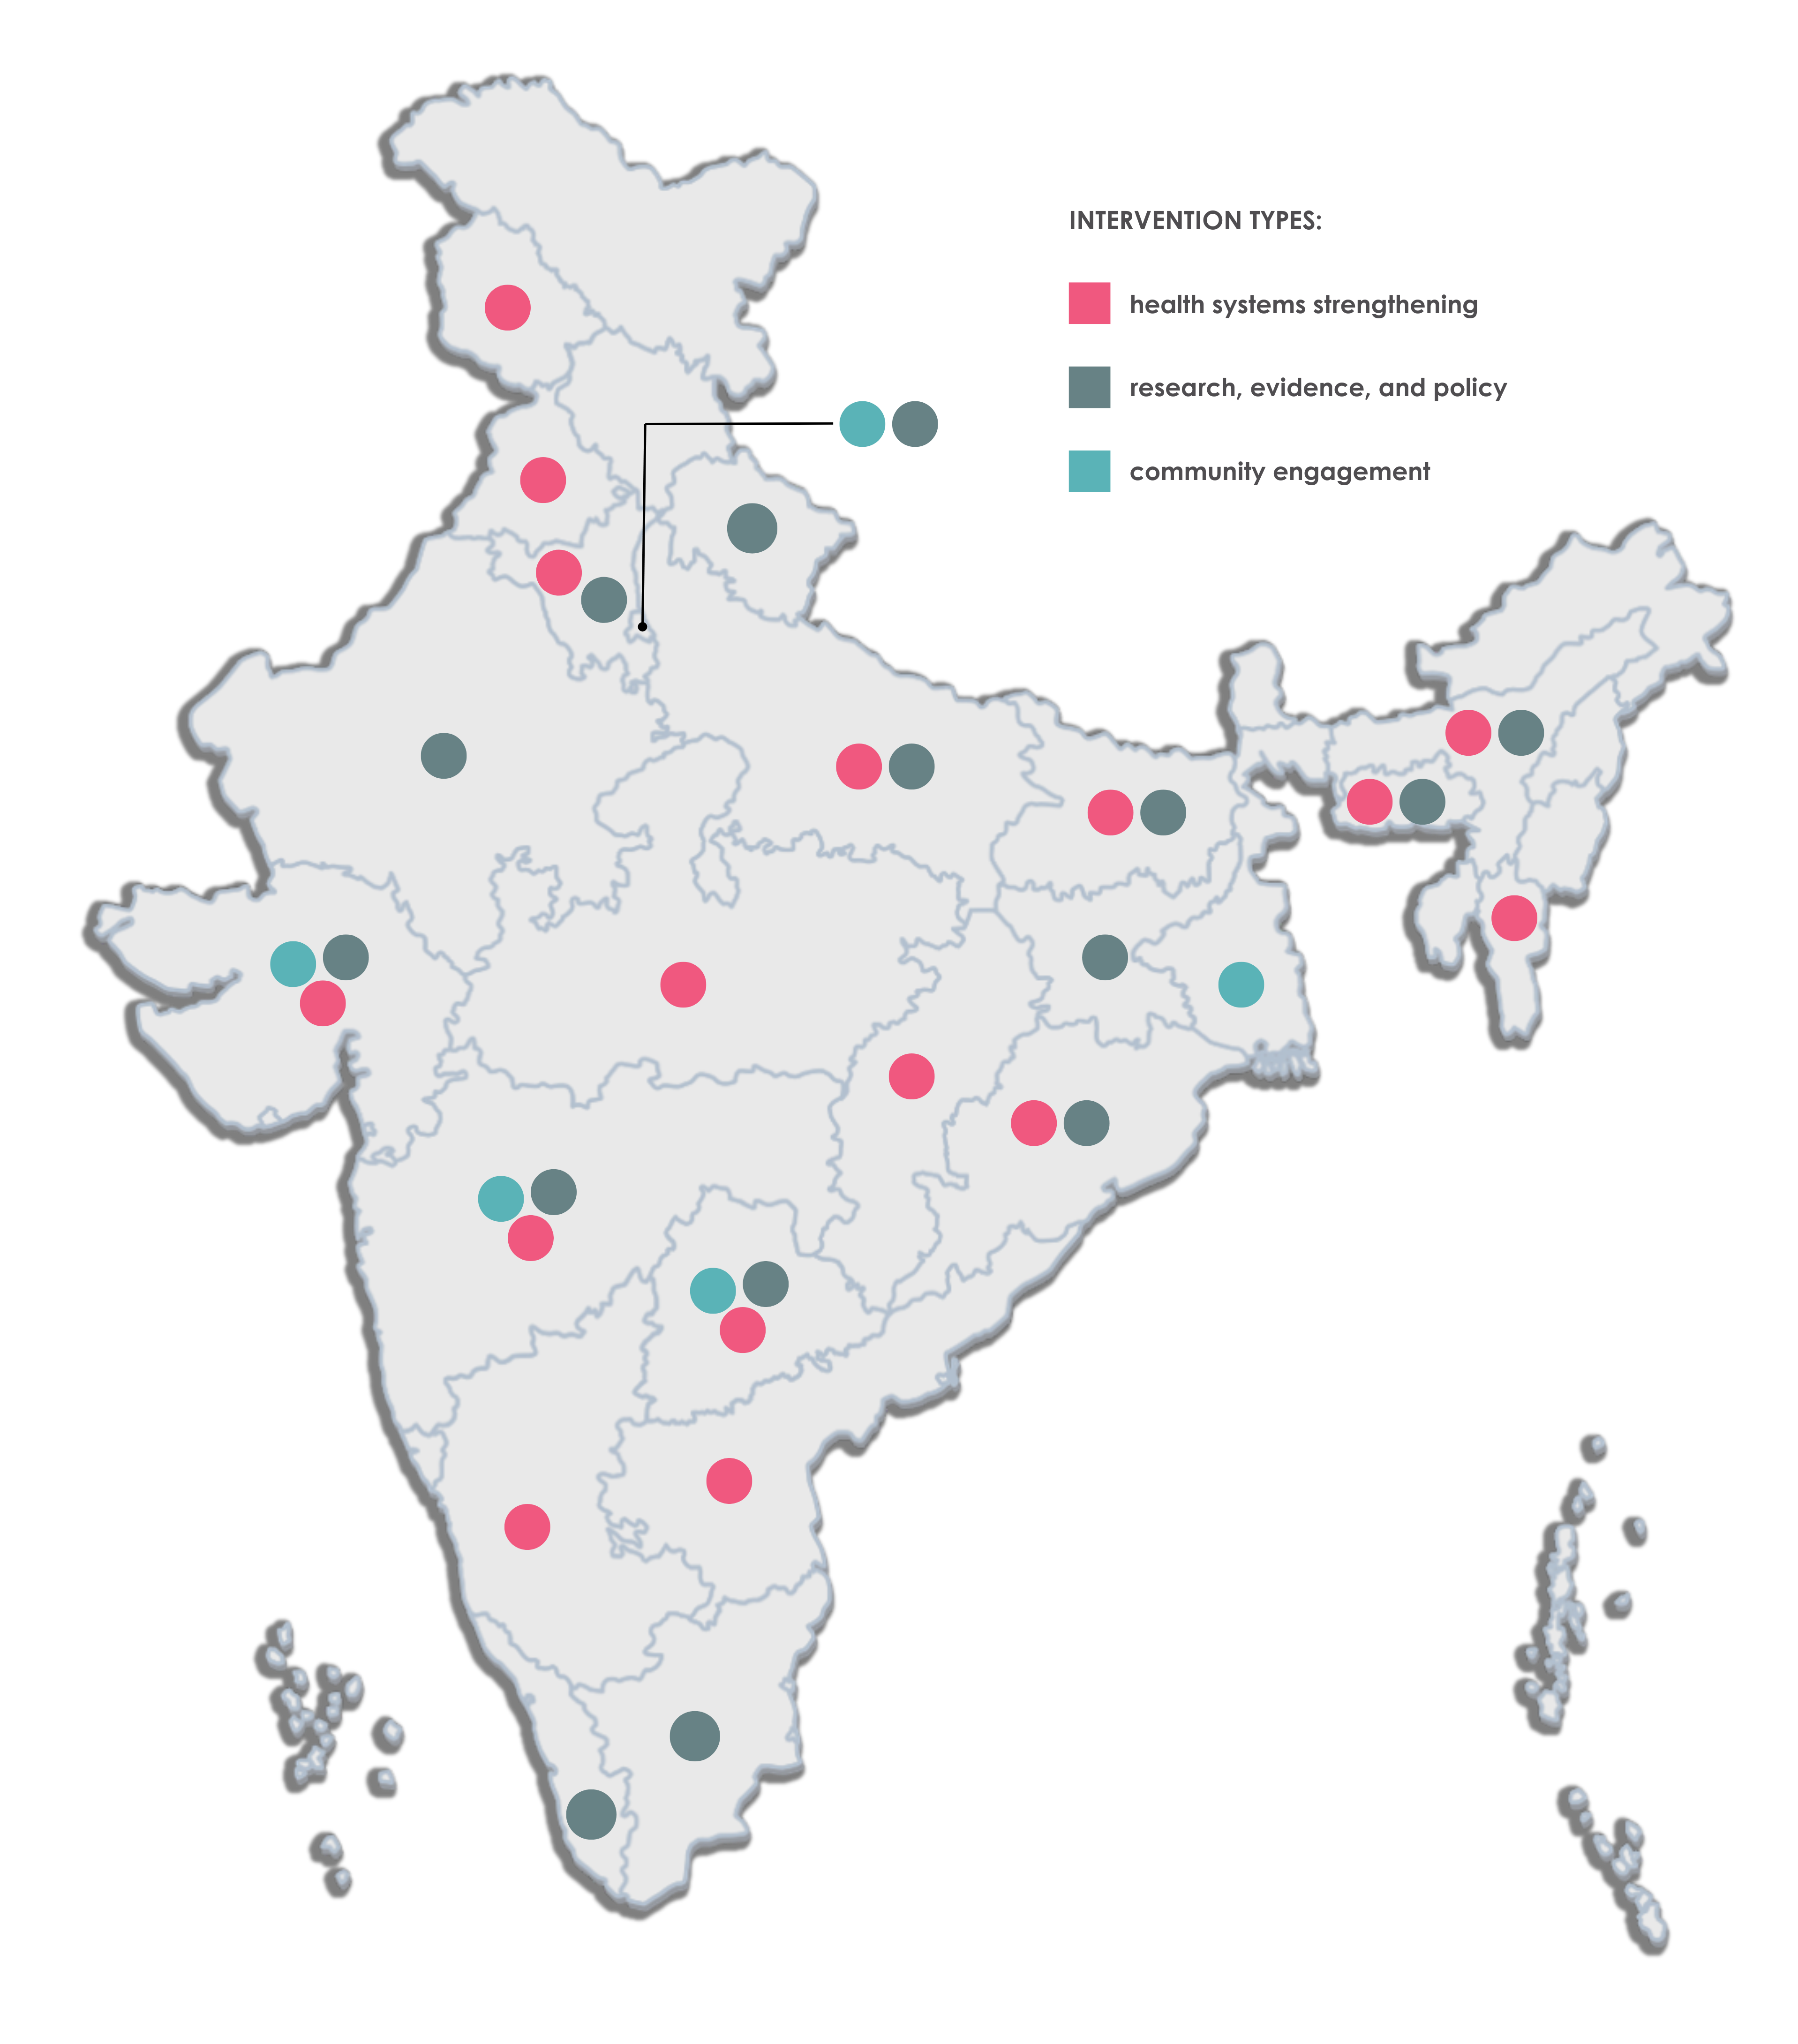 Map of India showing where TIFA-funded interventions are taking place.